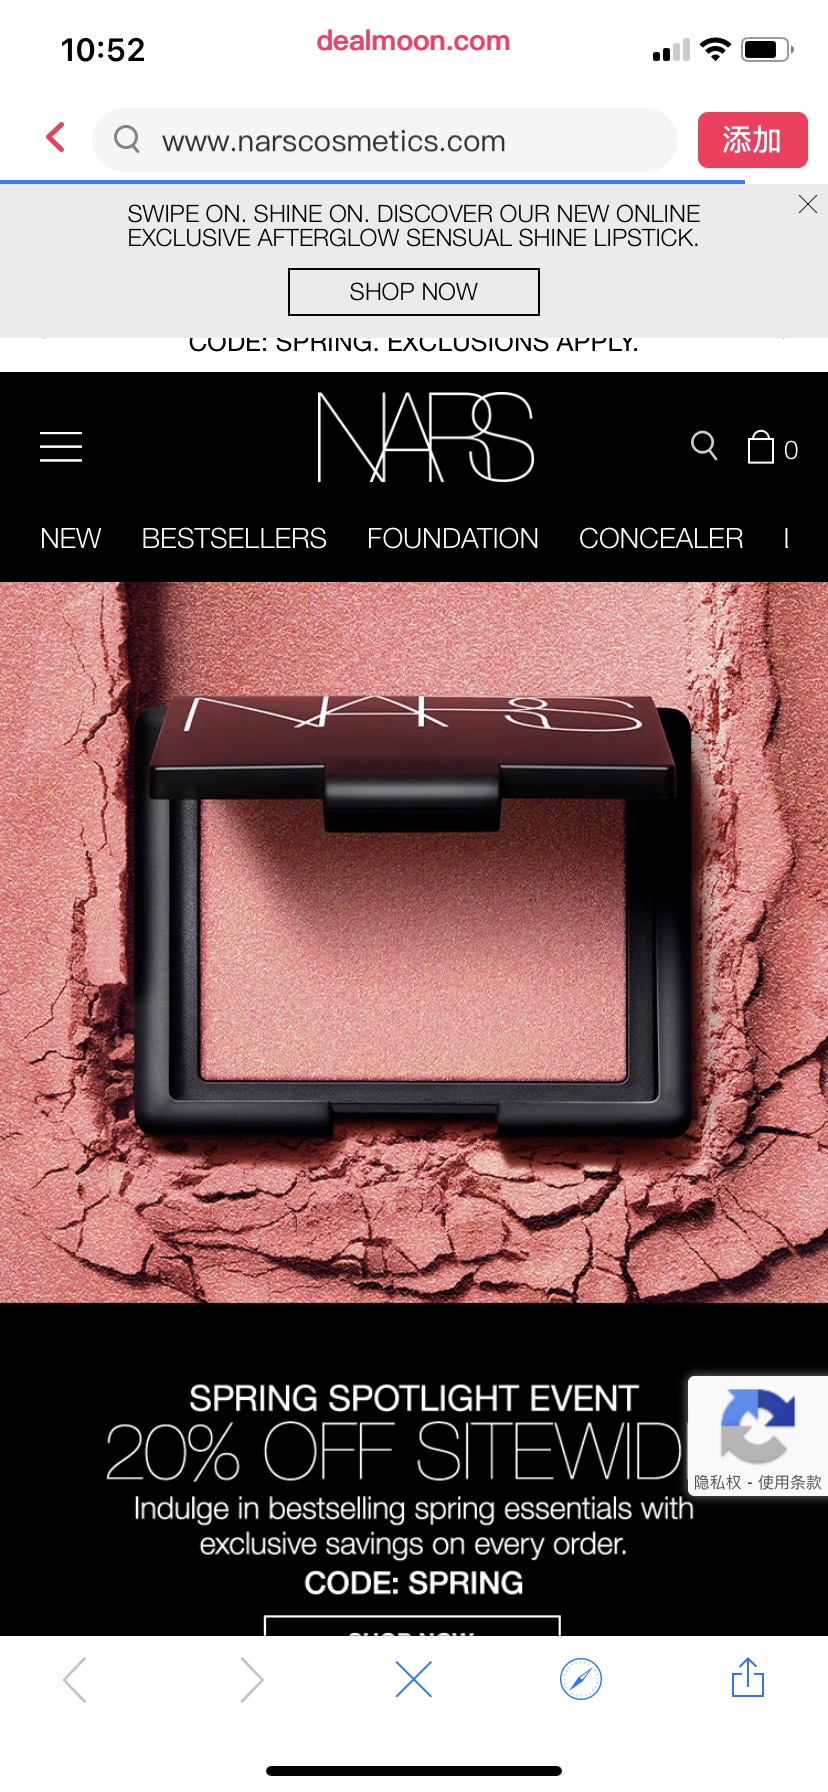 NARS Cosmetics | The Official Store | Makeup and Skincare全场八折